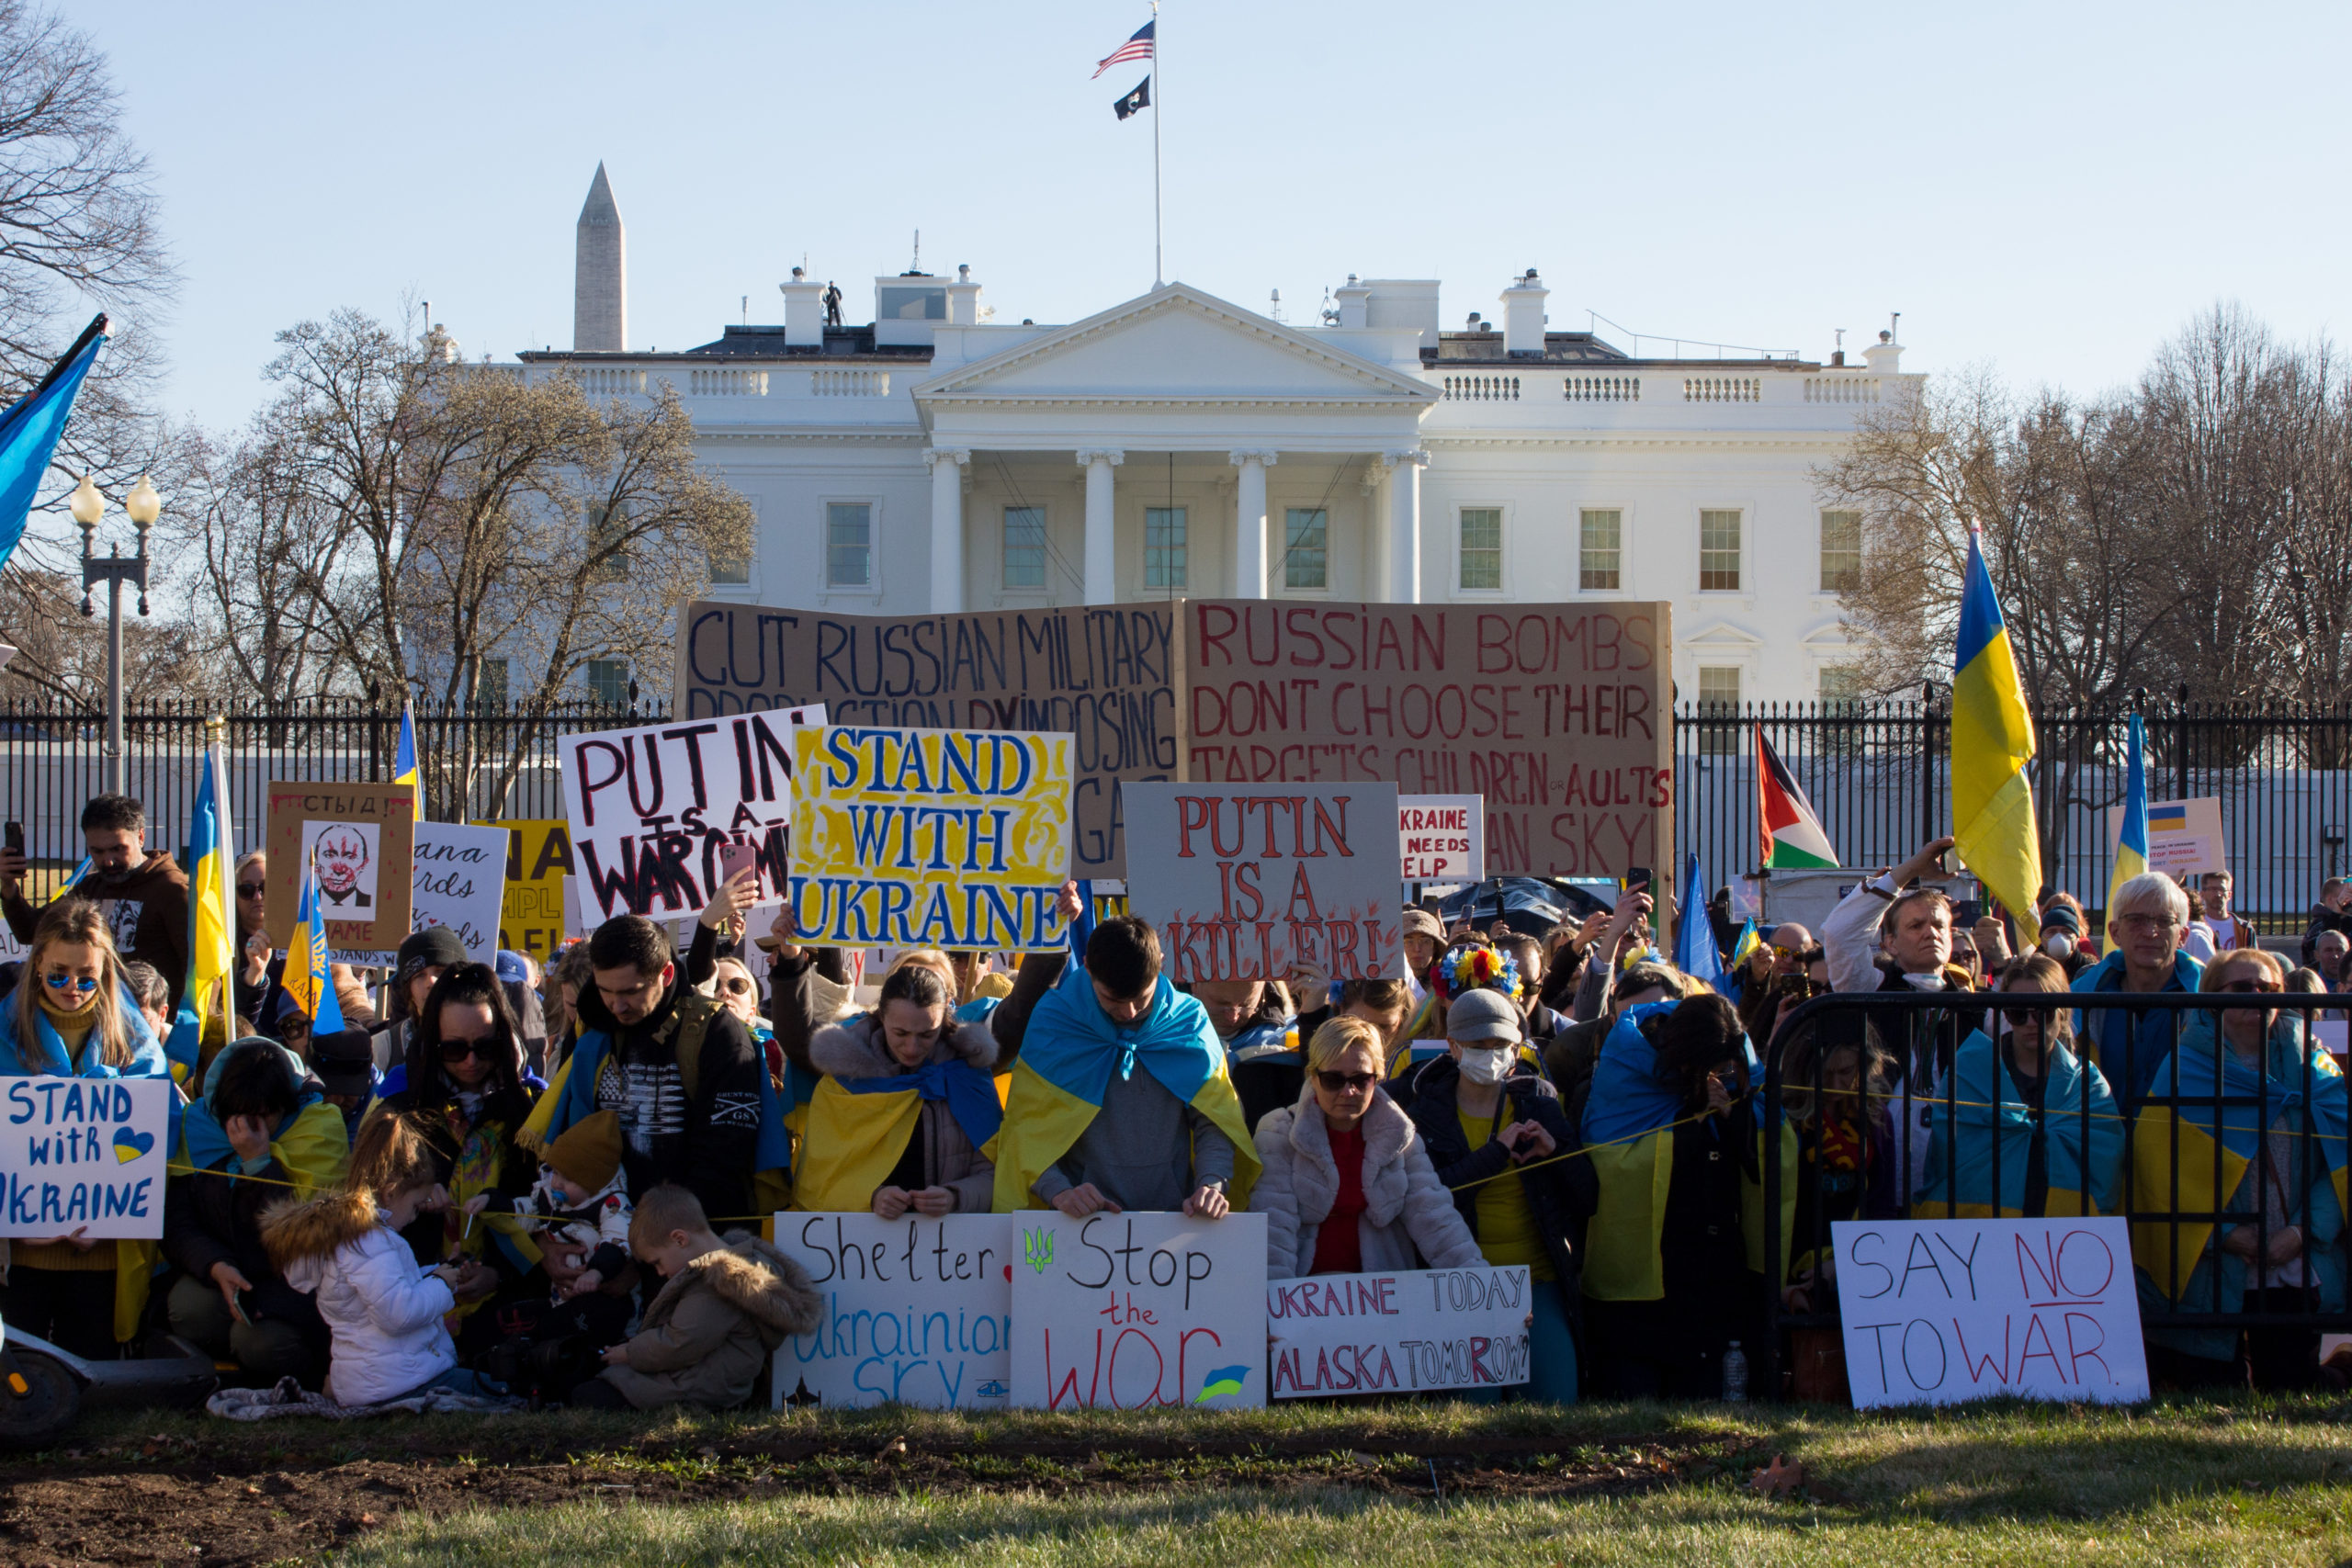 Demonstrators hold signs and flags in support of Ukraine in front of the White House